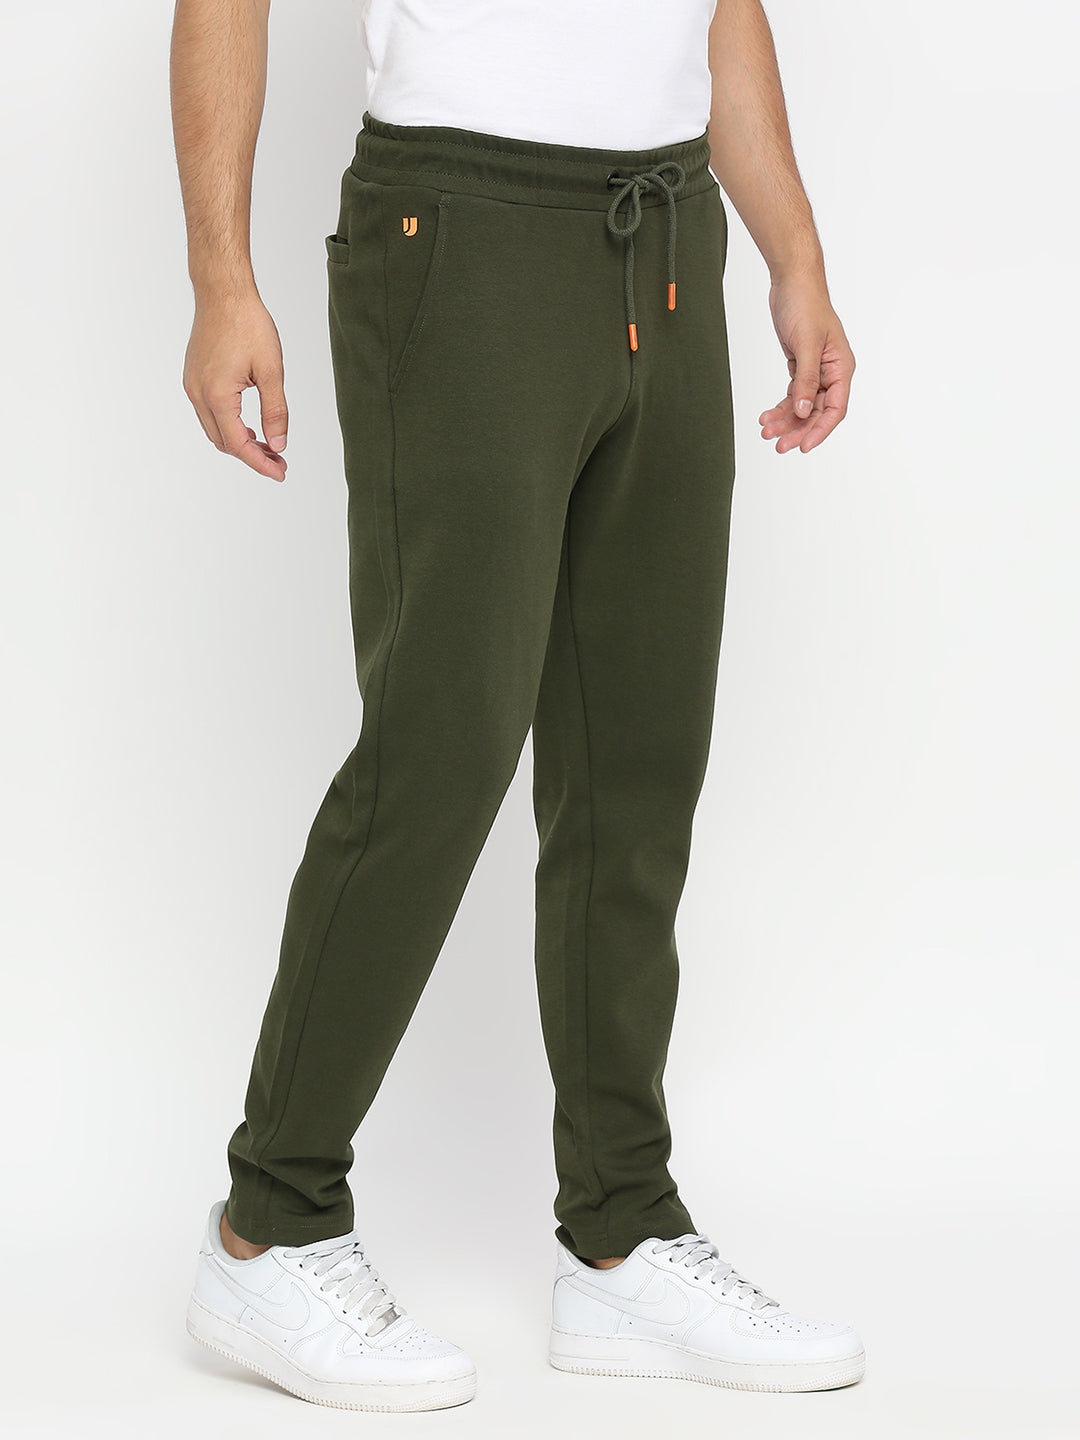 Men Premium Knitted Rifle Green Cotton Straight Fit Trackpants - UnderJeans by Spykar